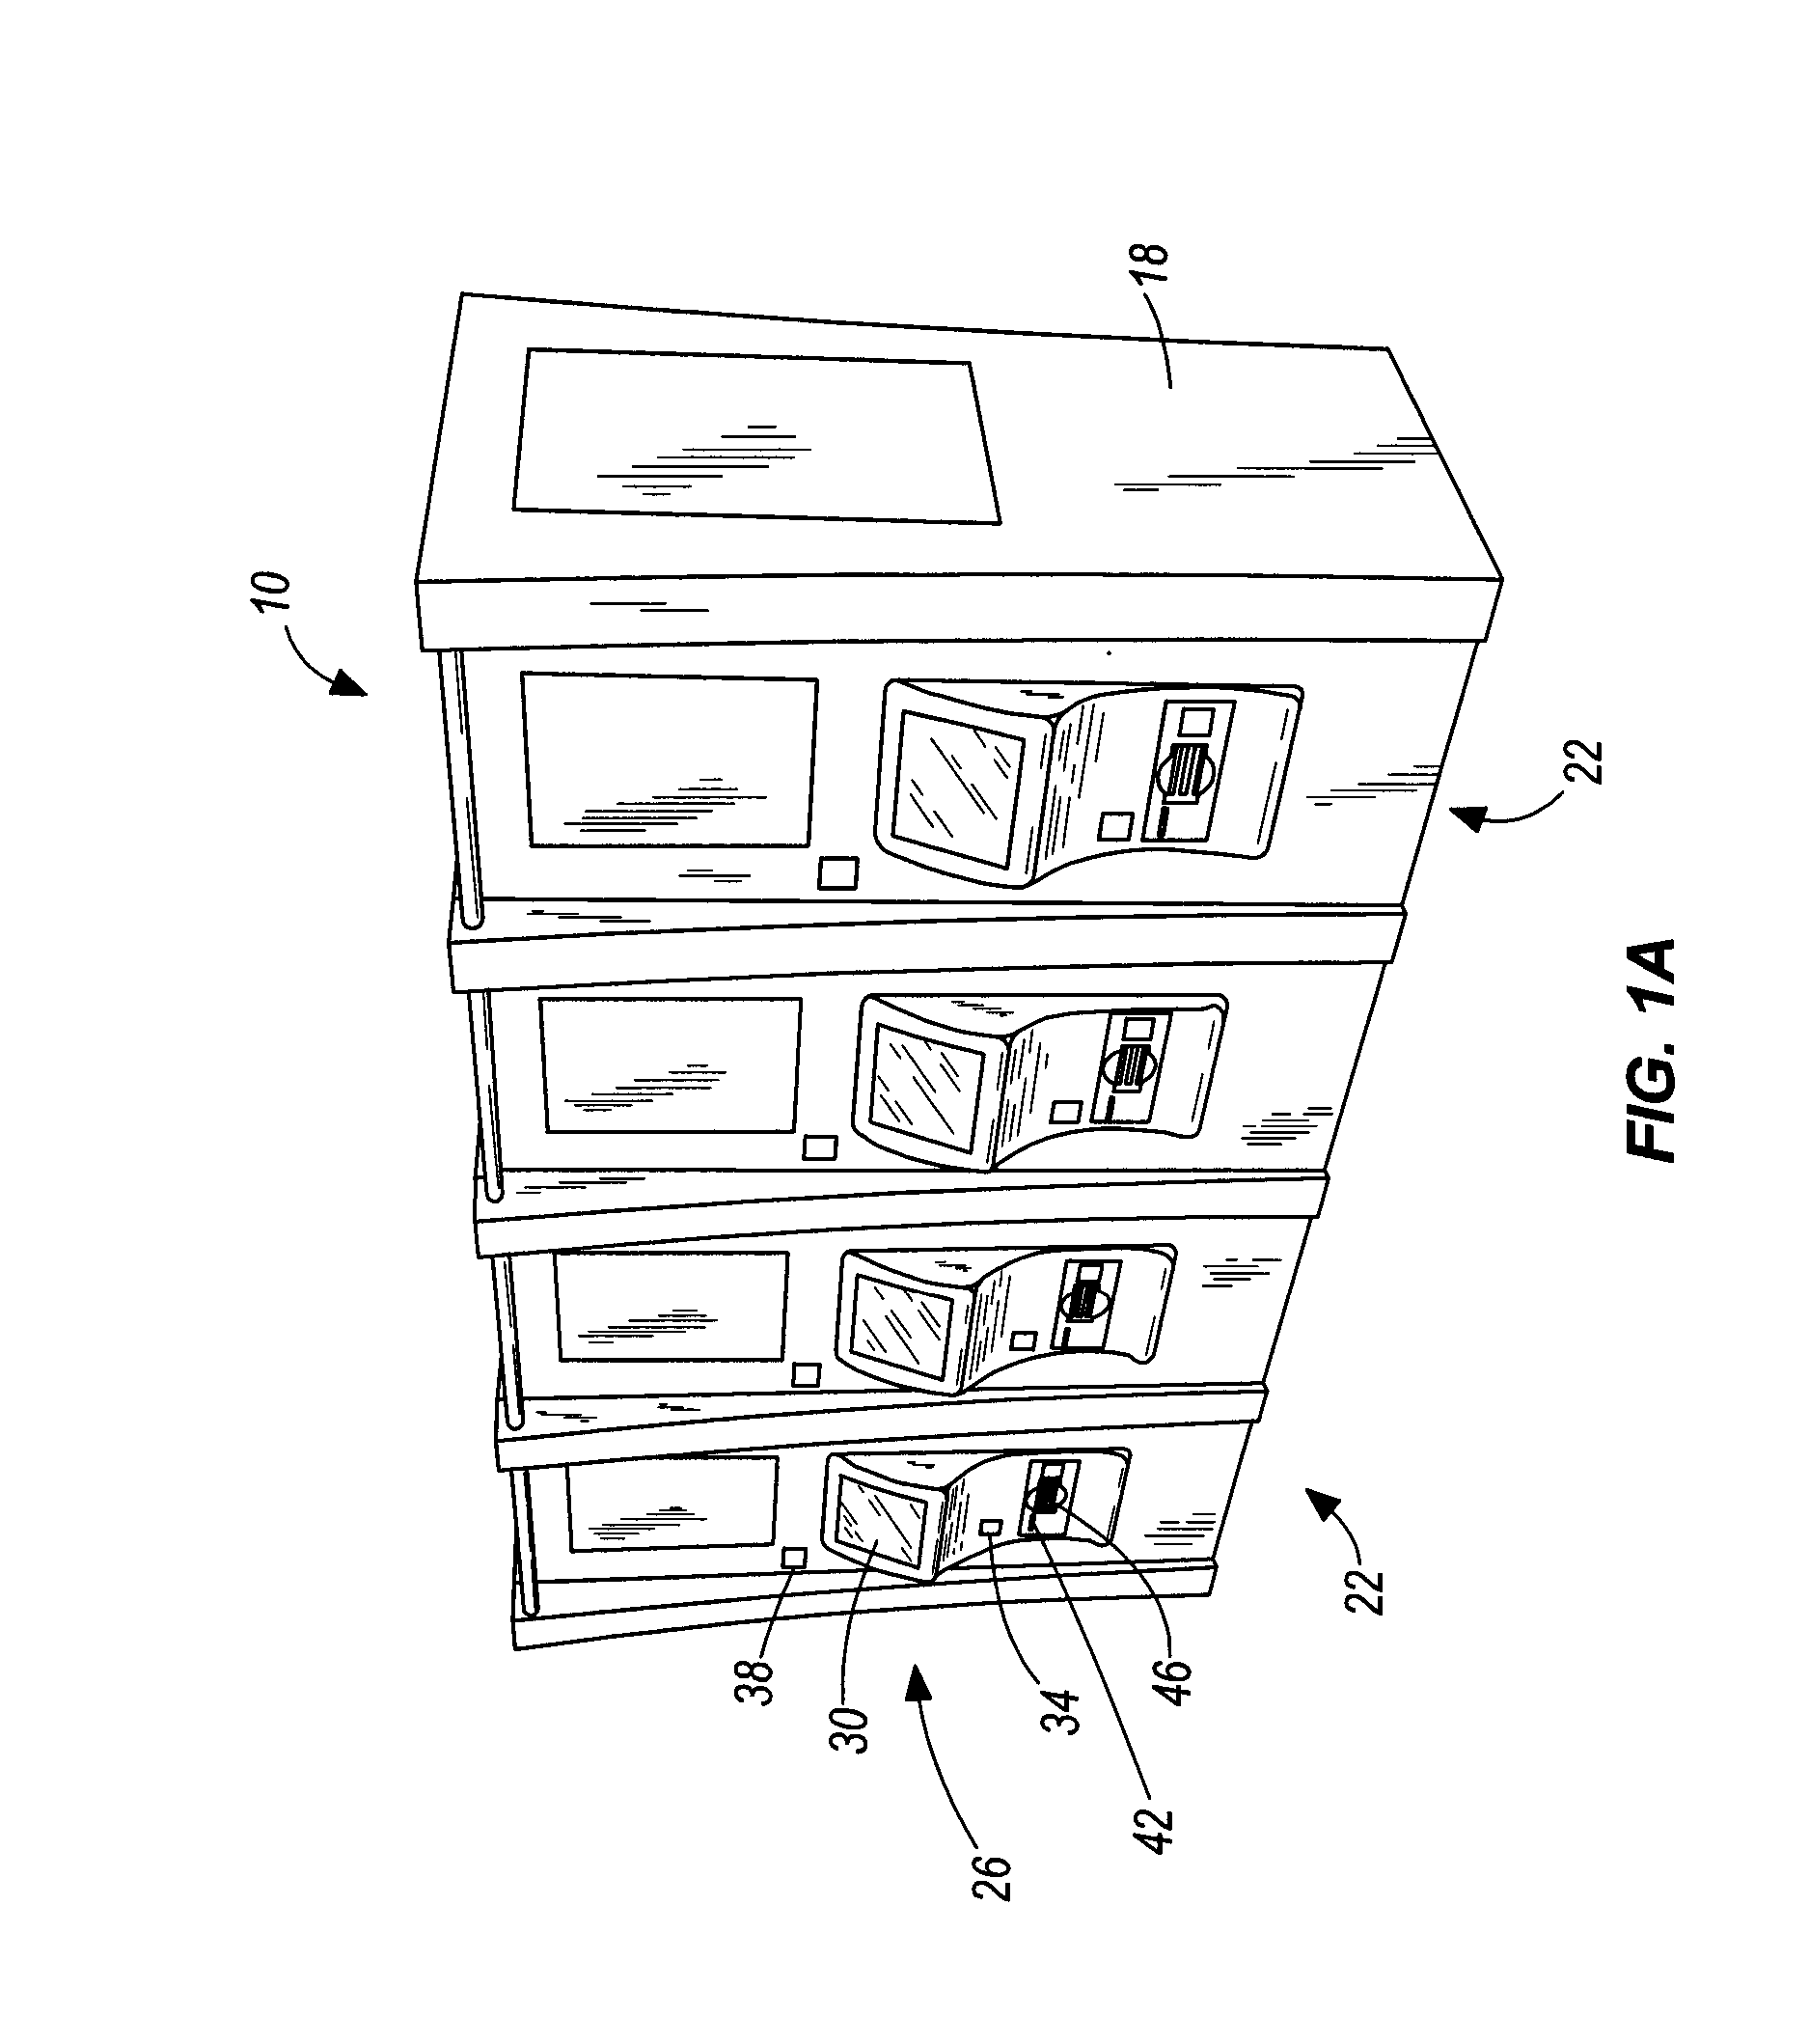 Automated business system and method of vending and returning a consumer product